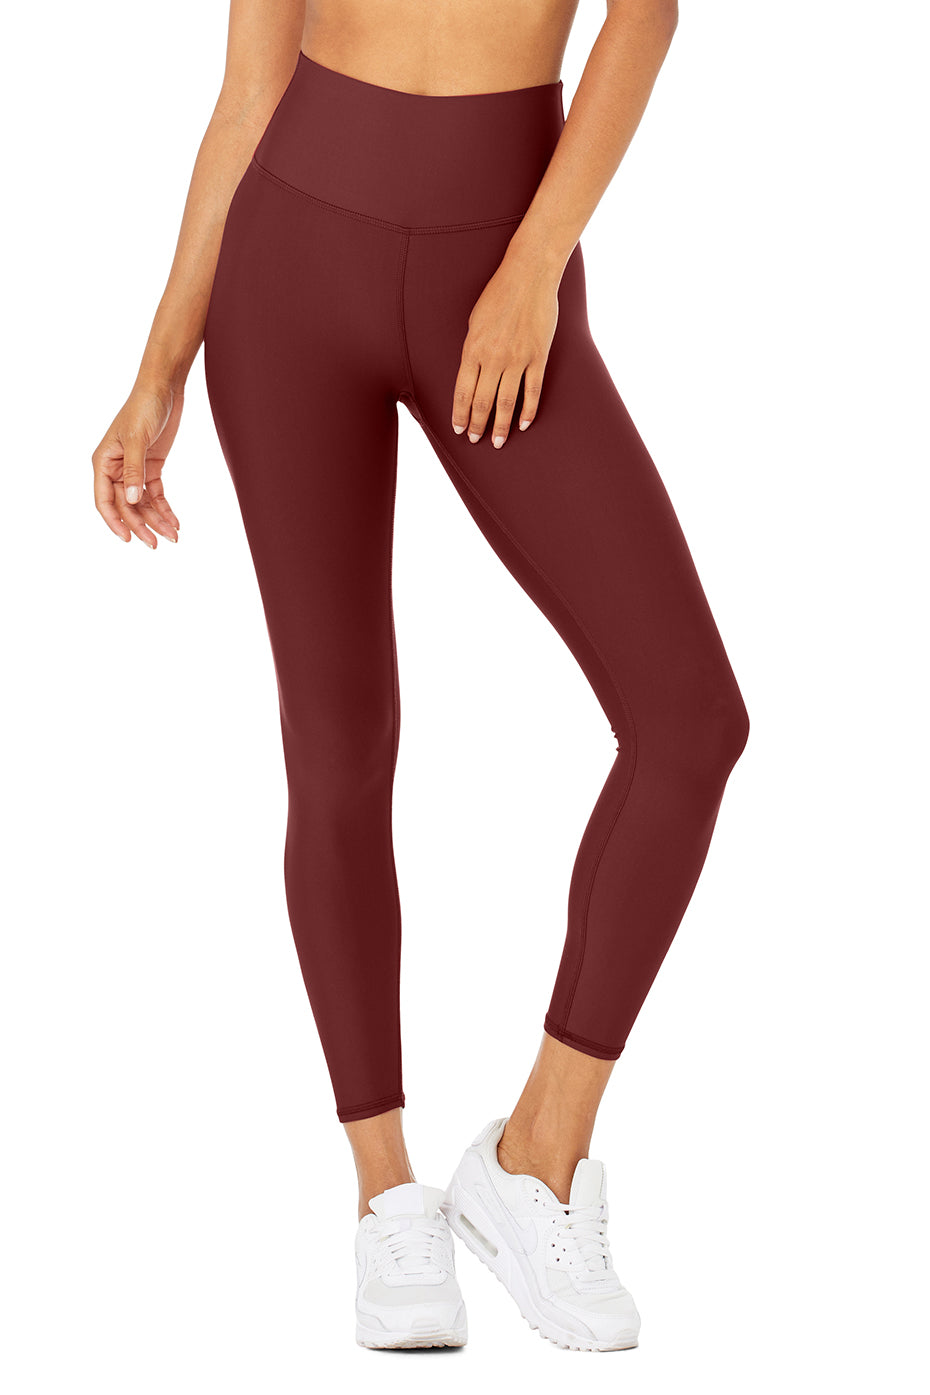 7/8 High-Waist Airlift Legging in Cranberry by Alo Yoga - Work